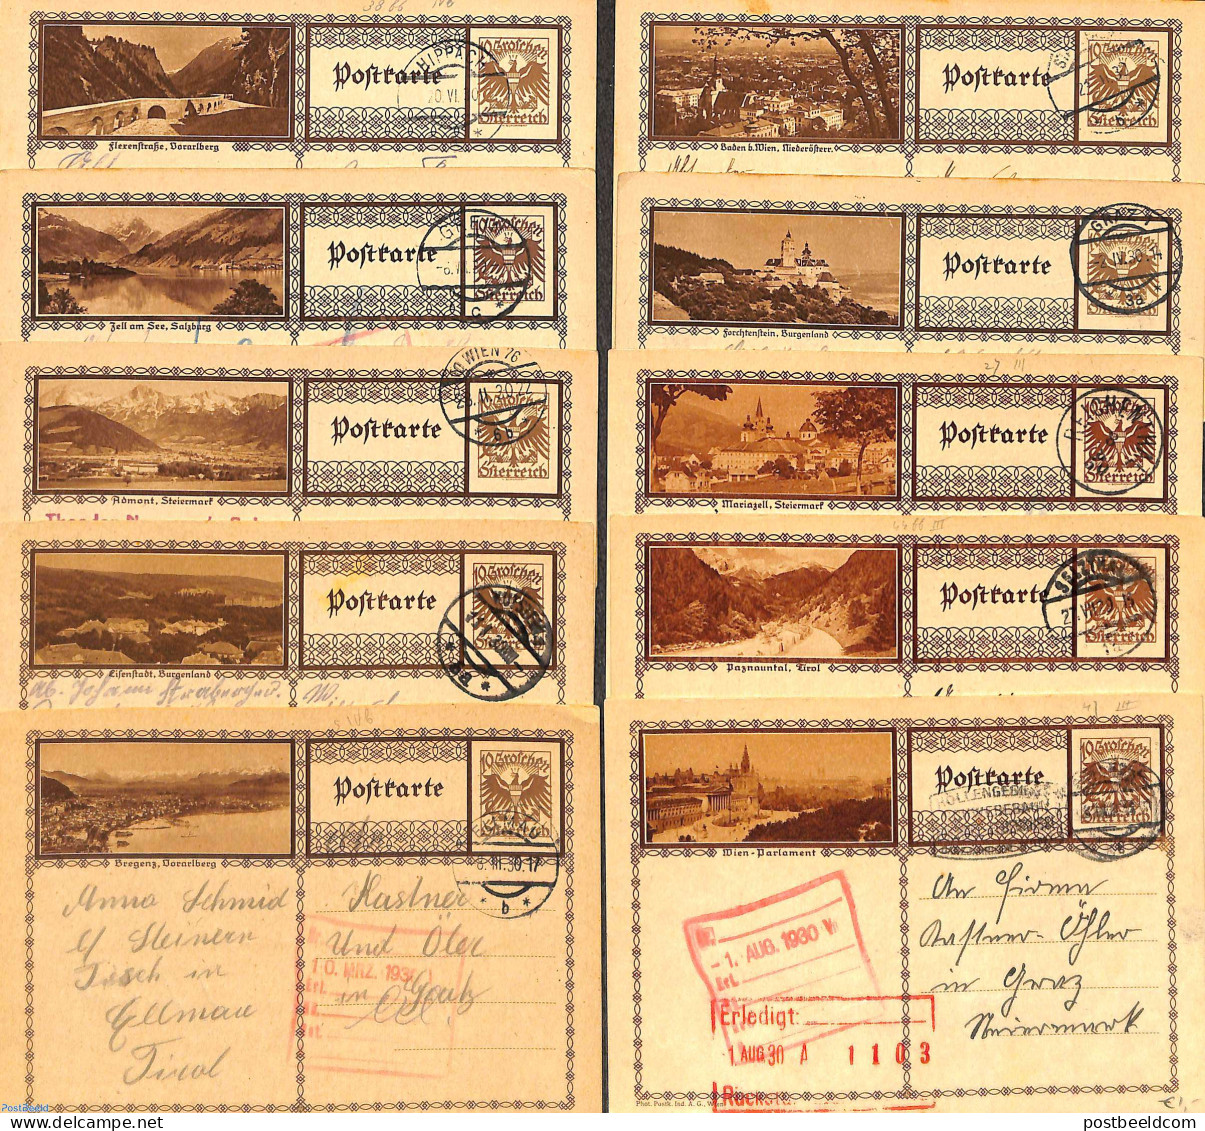 Austria 1930 Lot With 10 Used Illustrated Postcards, Used Postal Stationary - Brieven En Documenten